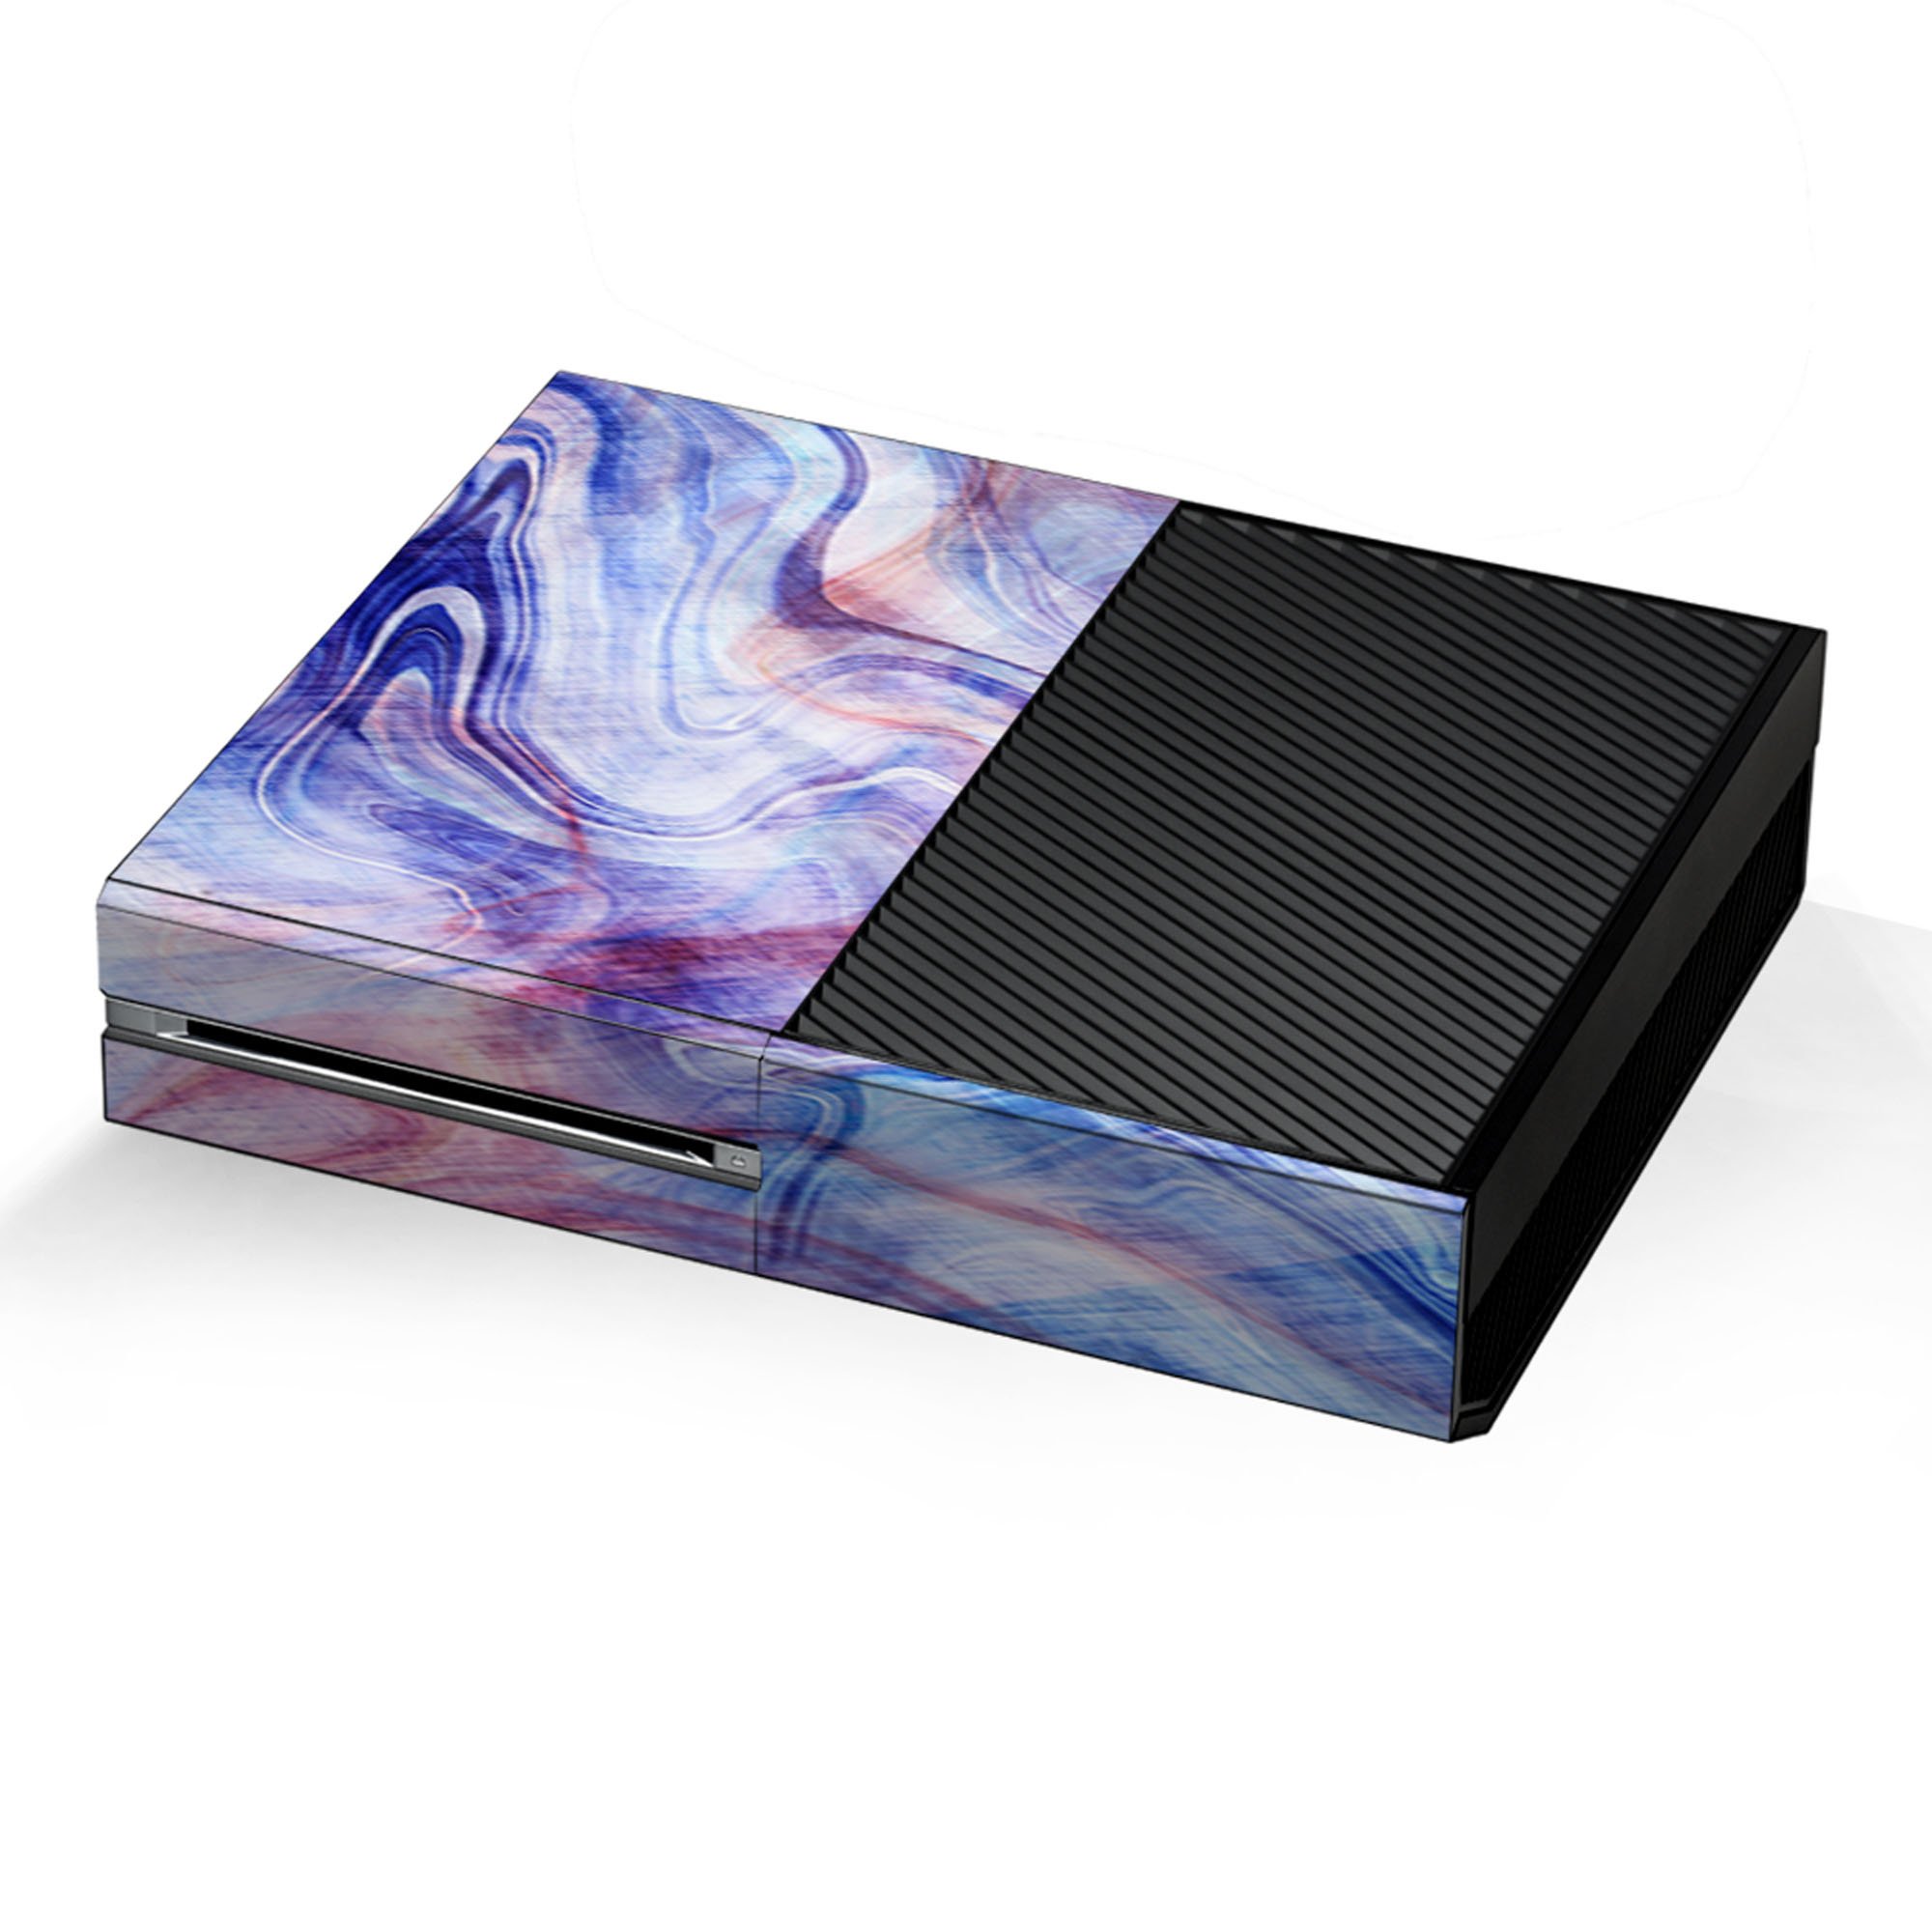 Skins Decal Vinyl Wrap for Xbox One Console - decal stickers skins cover -Purple Marble Pink Blue Swirl - image 1 of 1